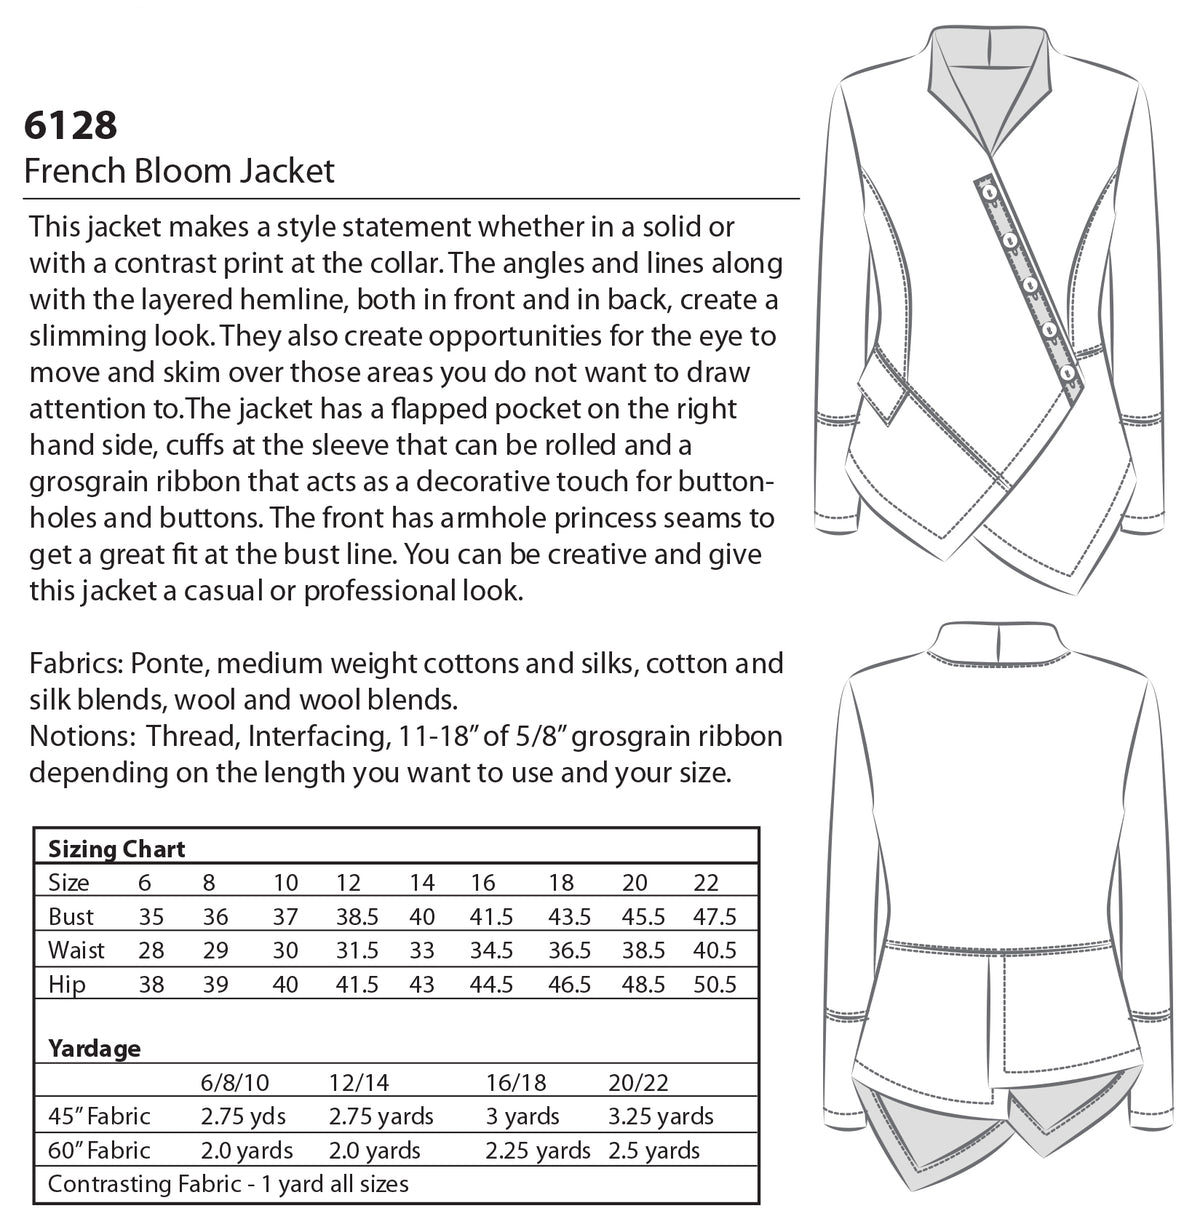 LORIANNE PATTERNS 6128 - FRENCH BLOOM JACKET (PRINTED)